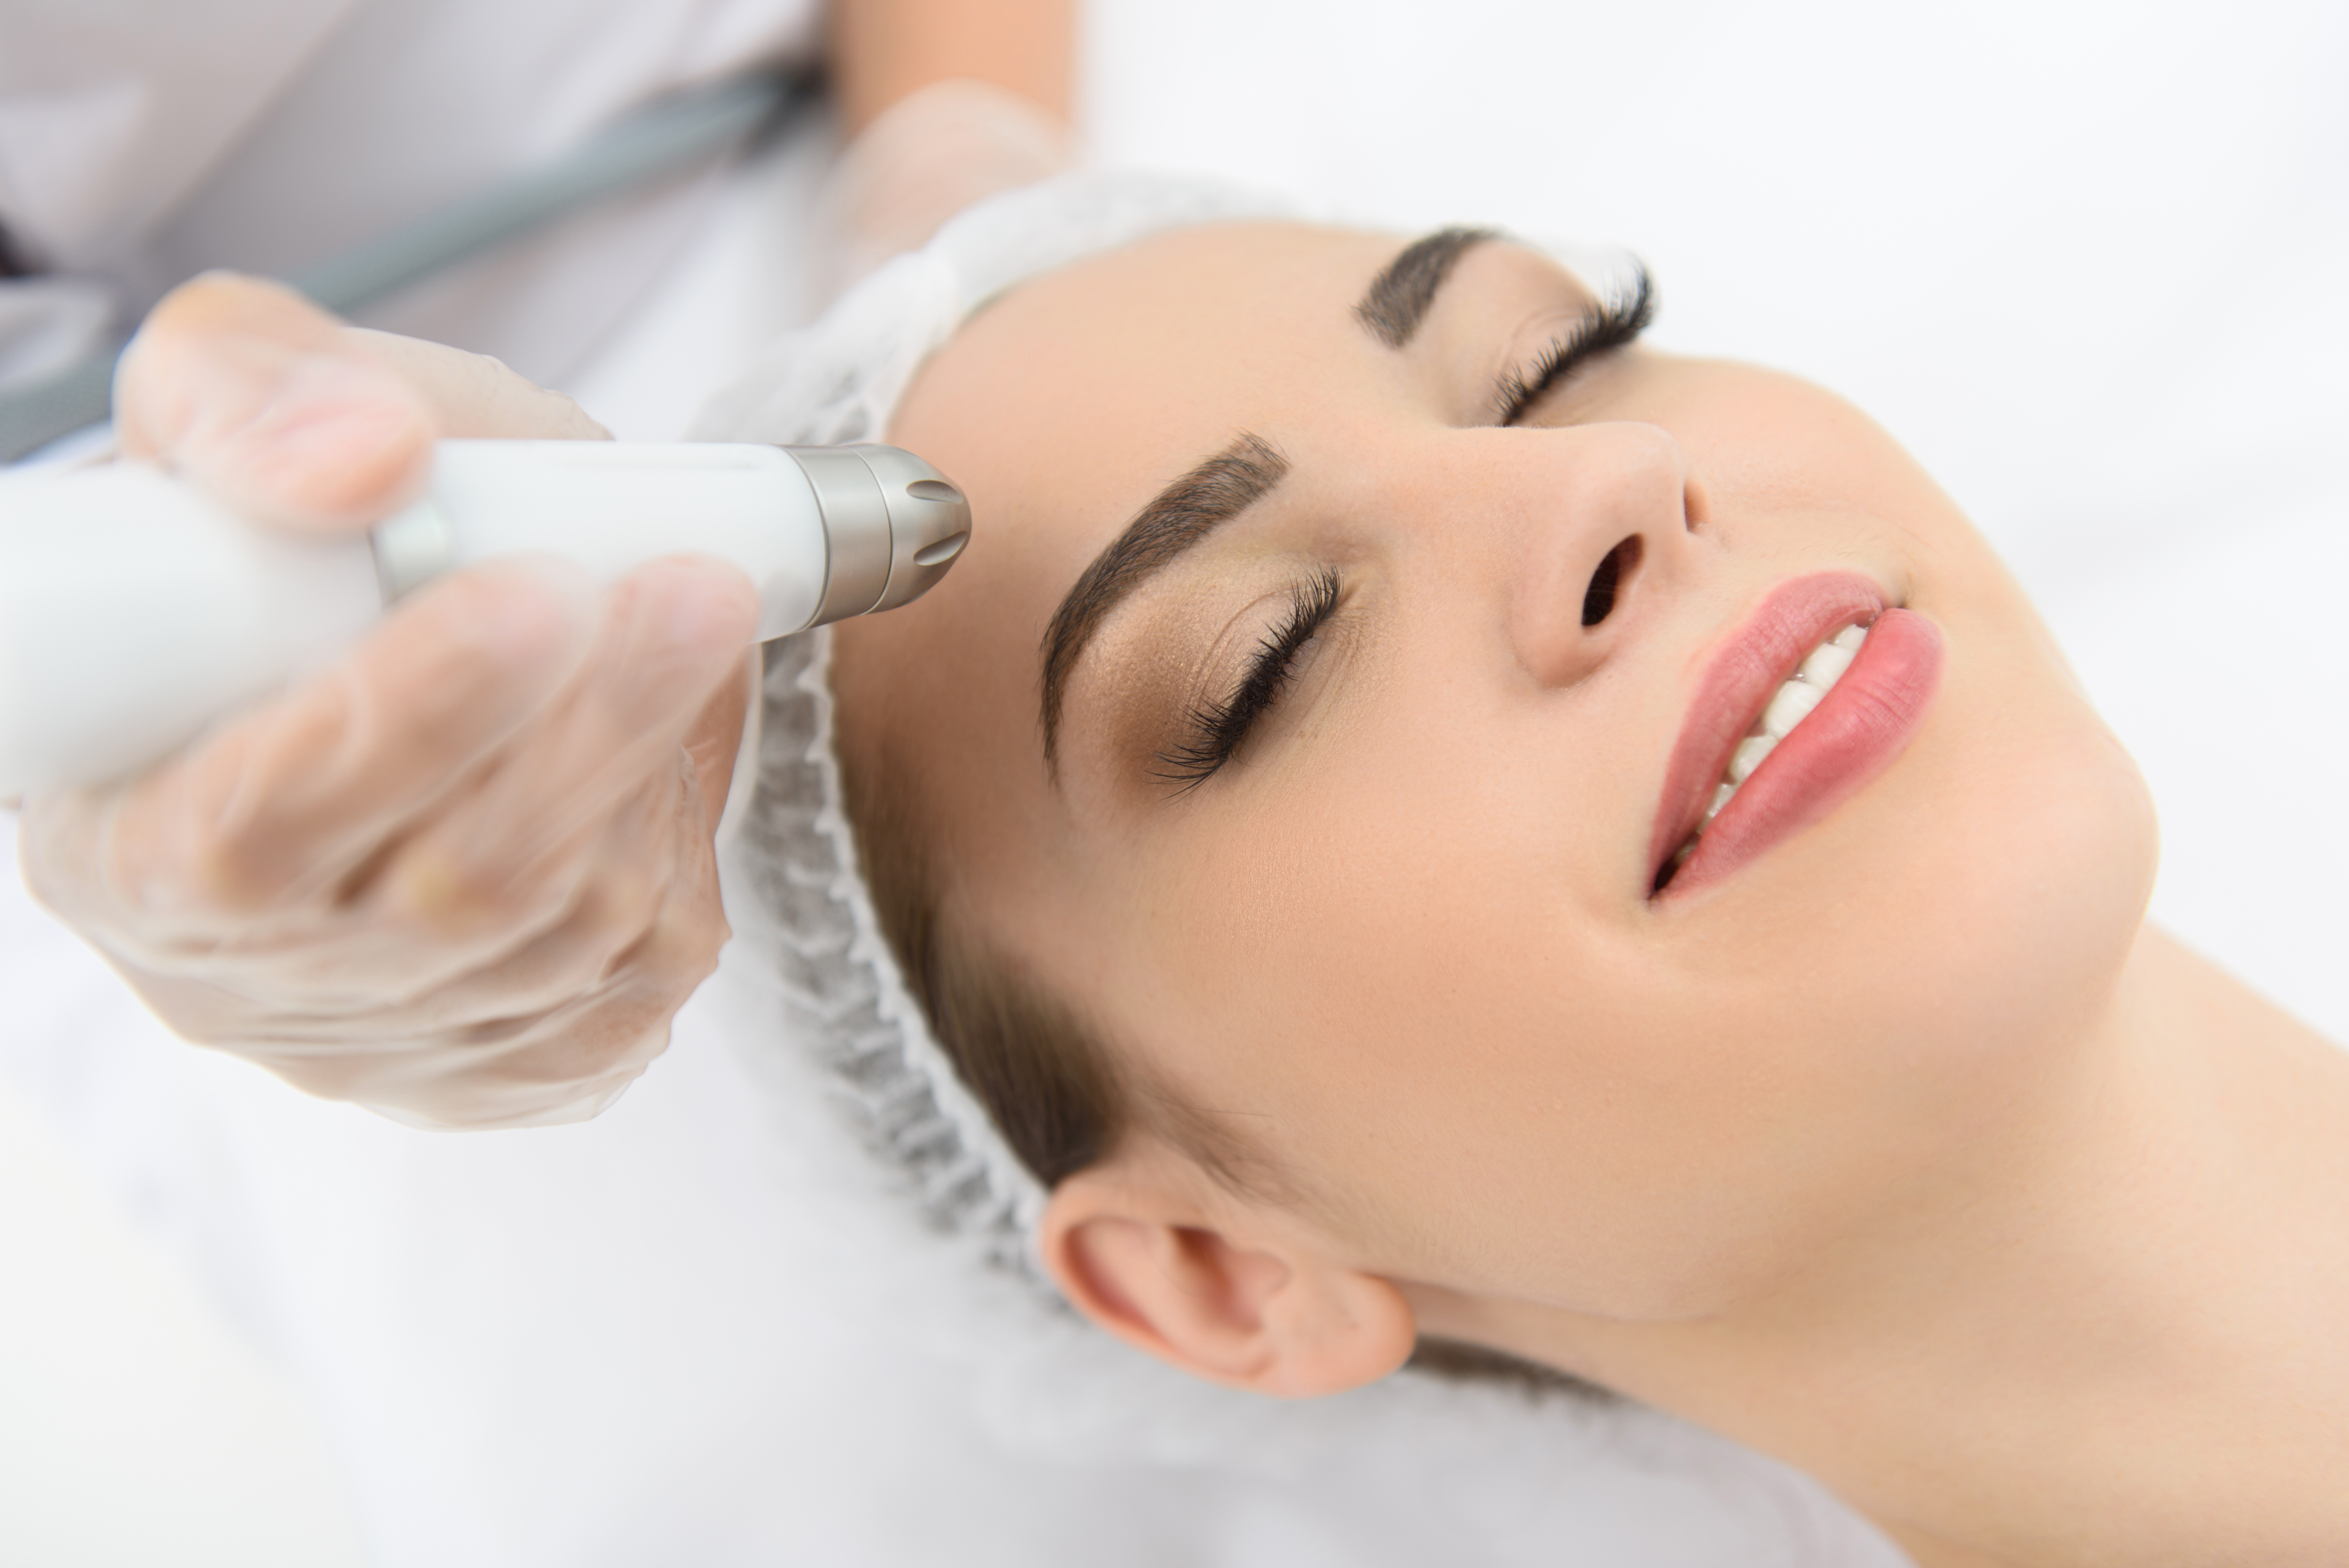 So You've Had Laser Treatments - Now What?